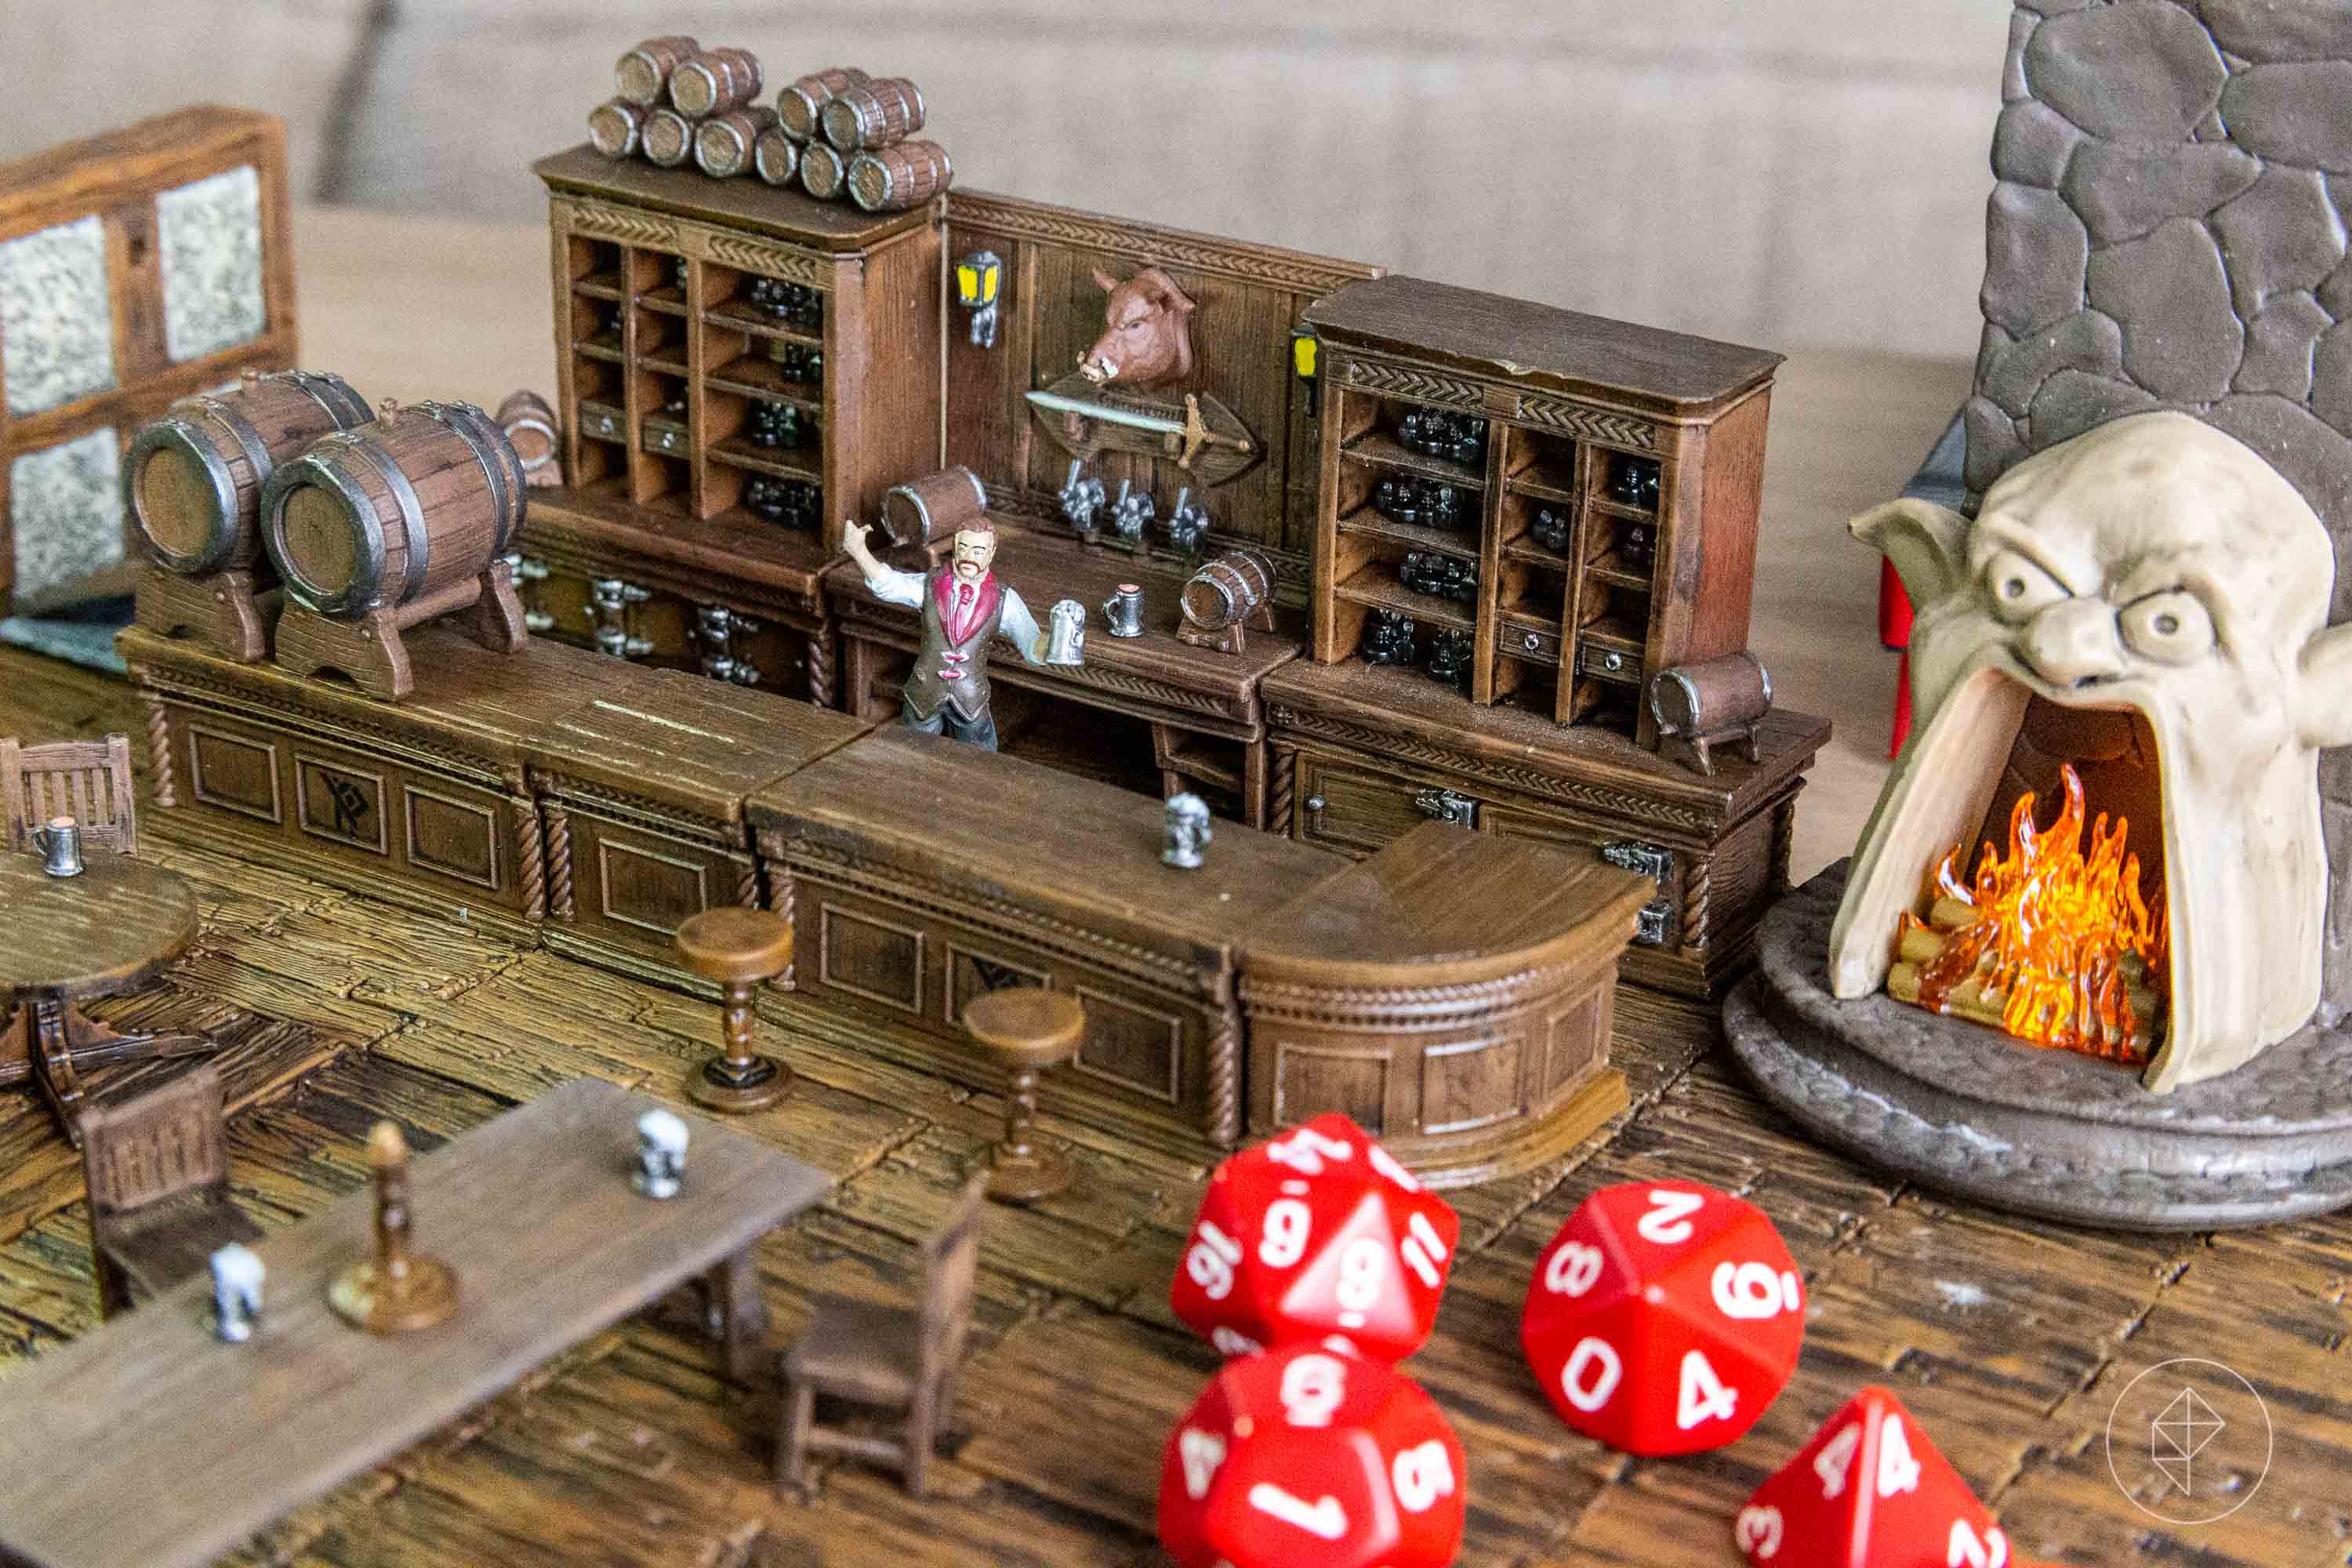 The corner bar at The Yawning Portal, complete with proprietor Durnan and a light-up hearth.